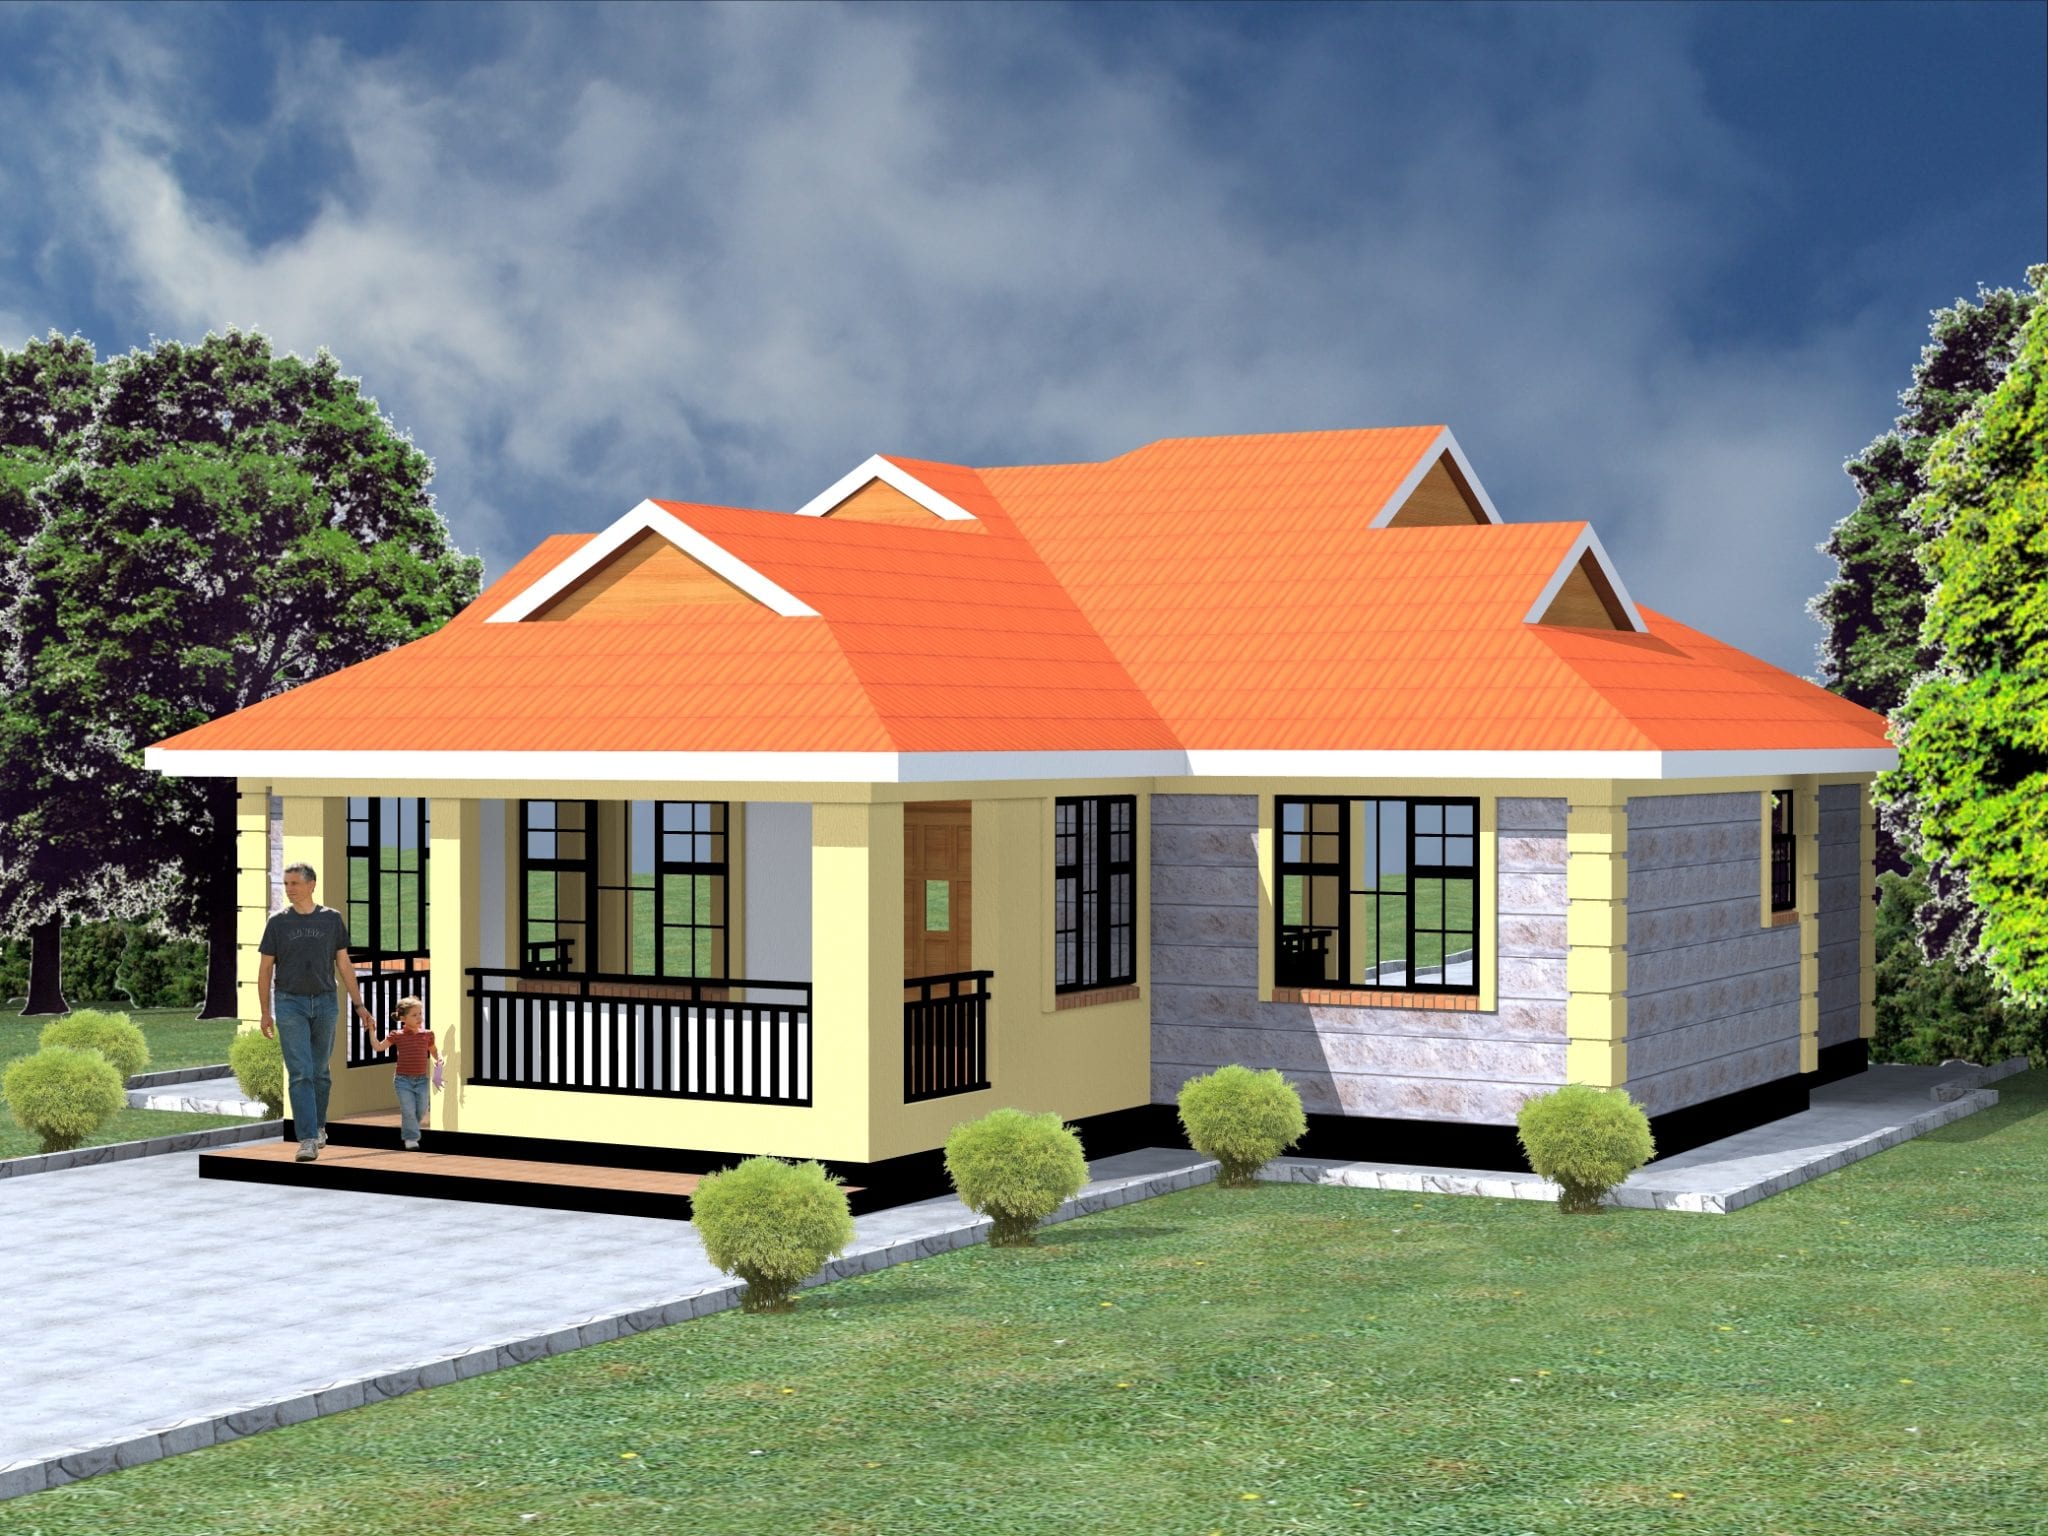 3 Bedroom bungalow house [Check Details here] HPD Consult